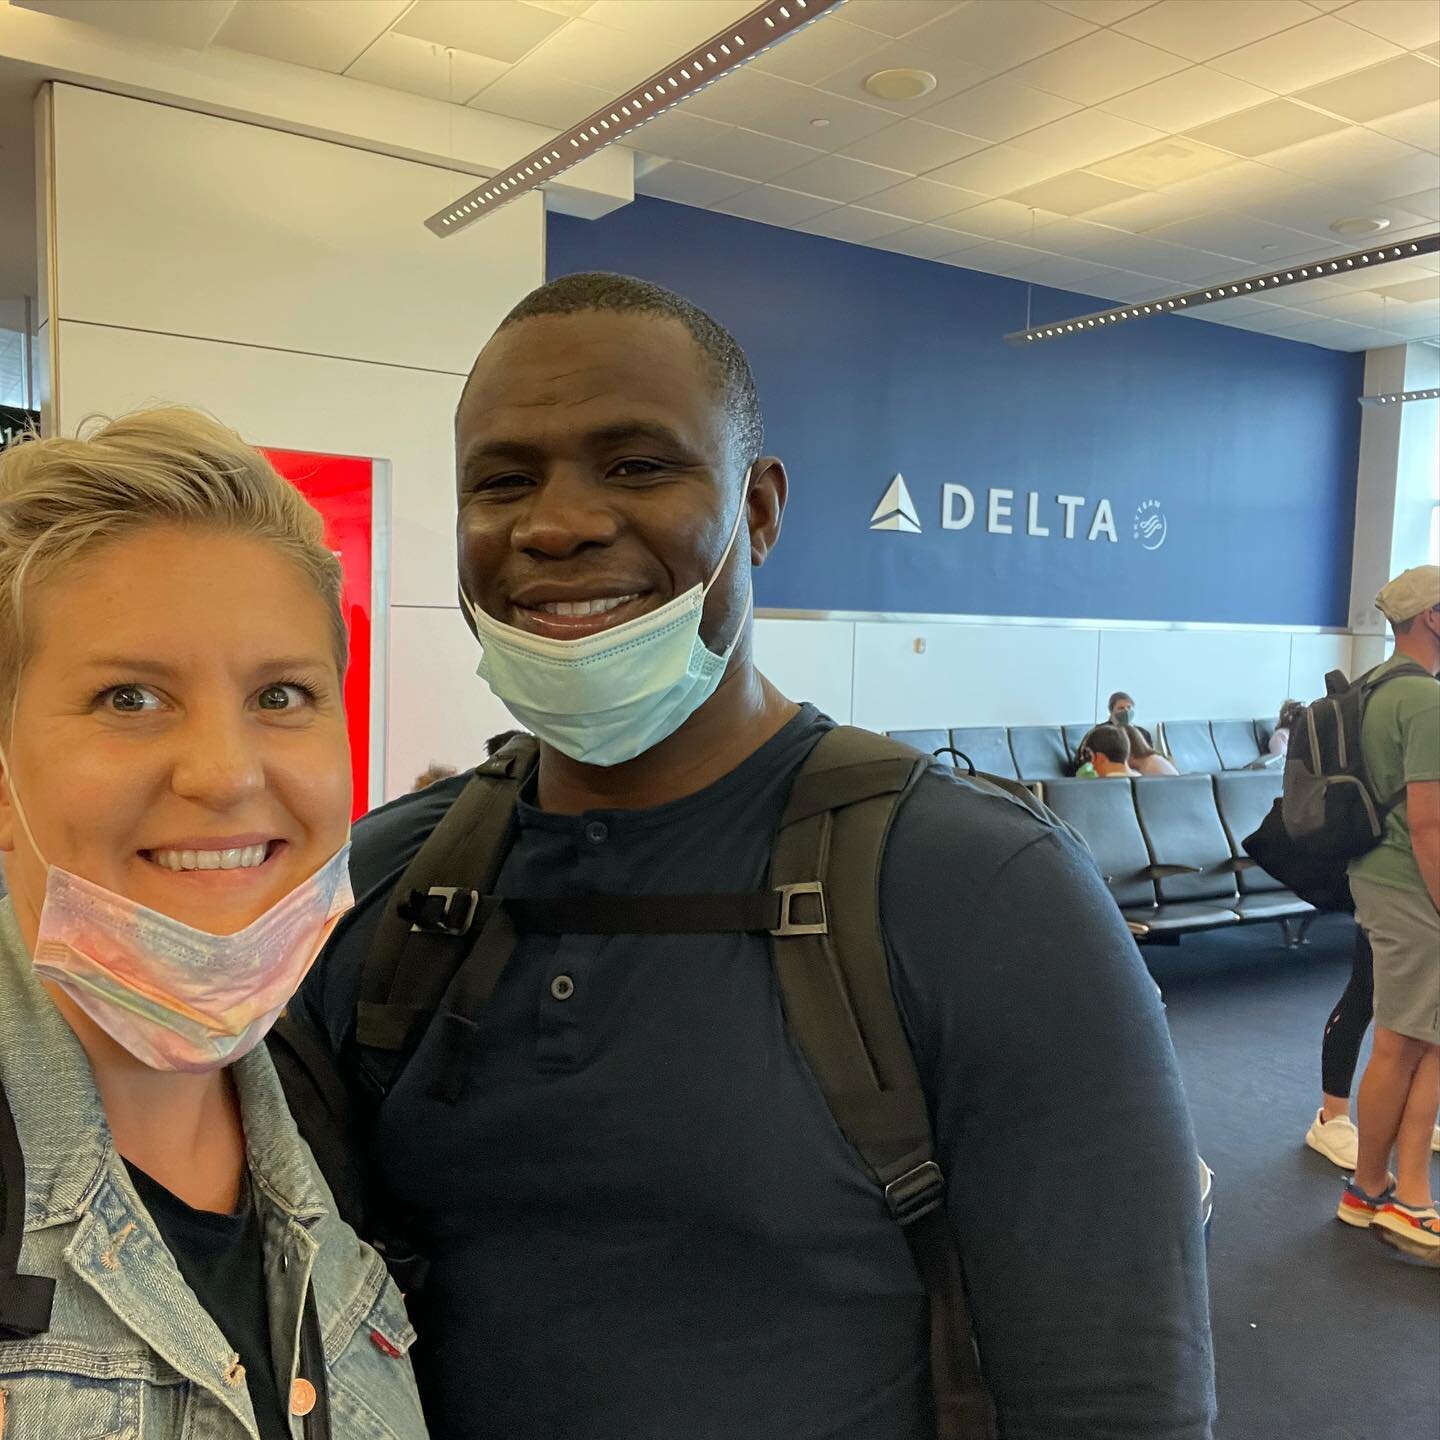 Fully vaccinated and it feels so good... AND finally traveling internationally again! 

We are on our way to Croatia! 

Our flights include a quick layover in Atlanta then Paris before we are arriving in Dubrovnik, Croatia.

Pictures are before takeo